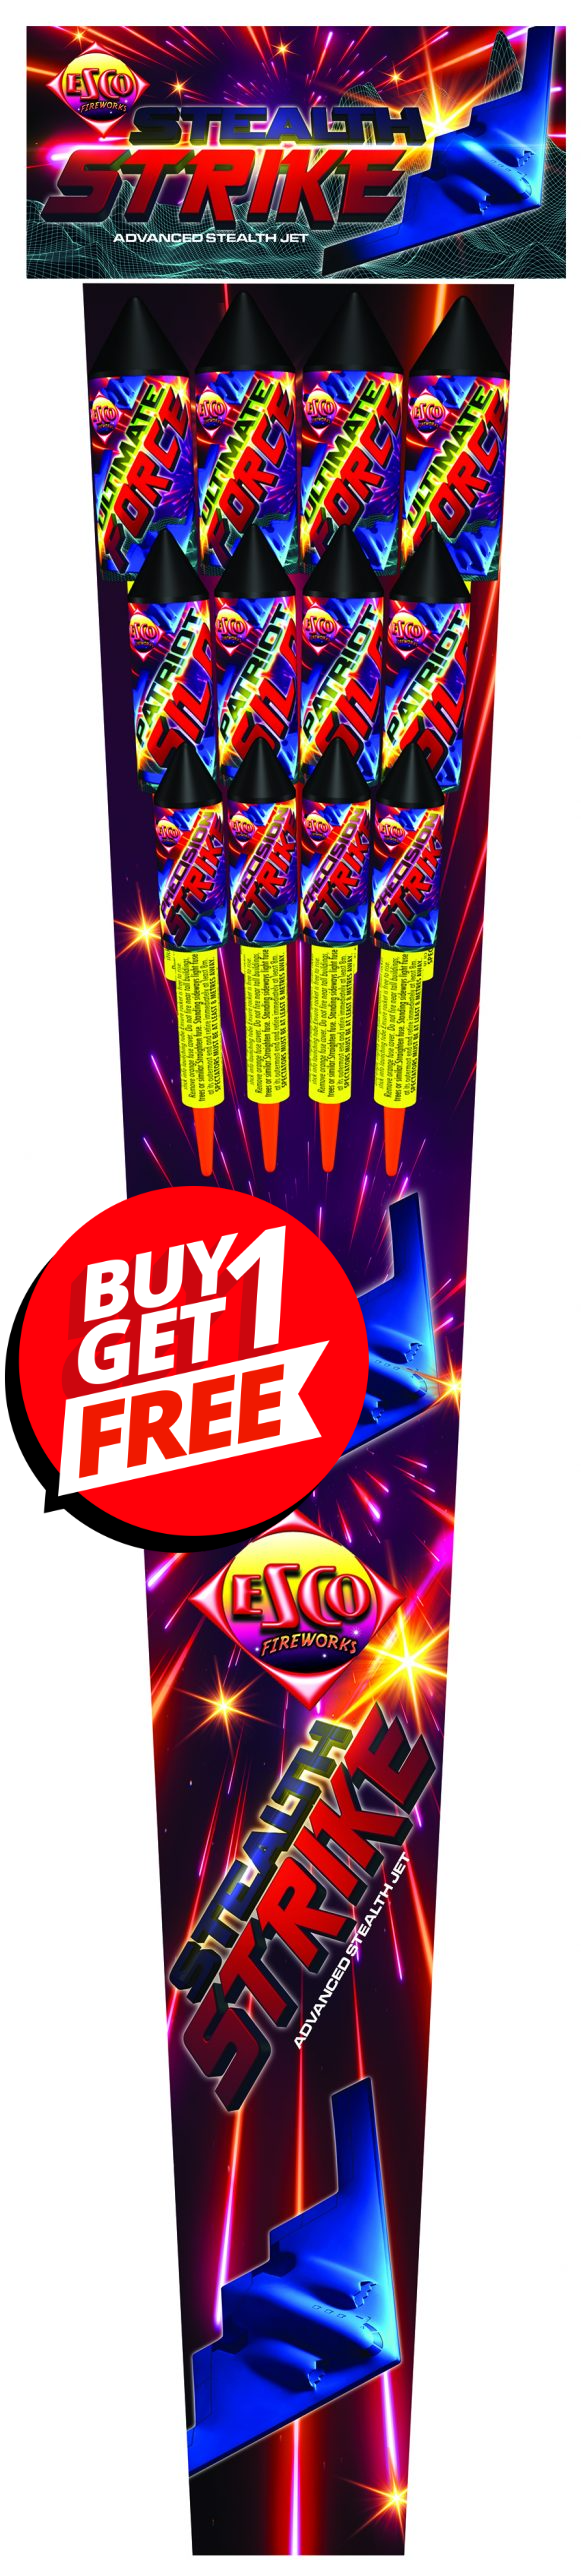 Stealth Strike - Low Noise Rockets (Pack of 12) - BUY 1 GET 1 FREE